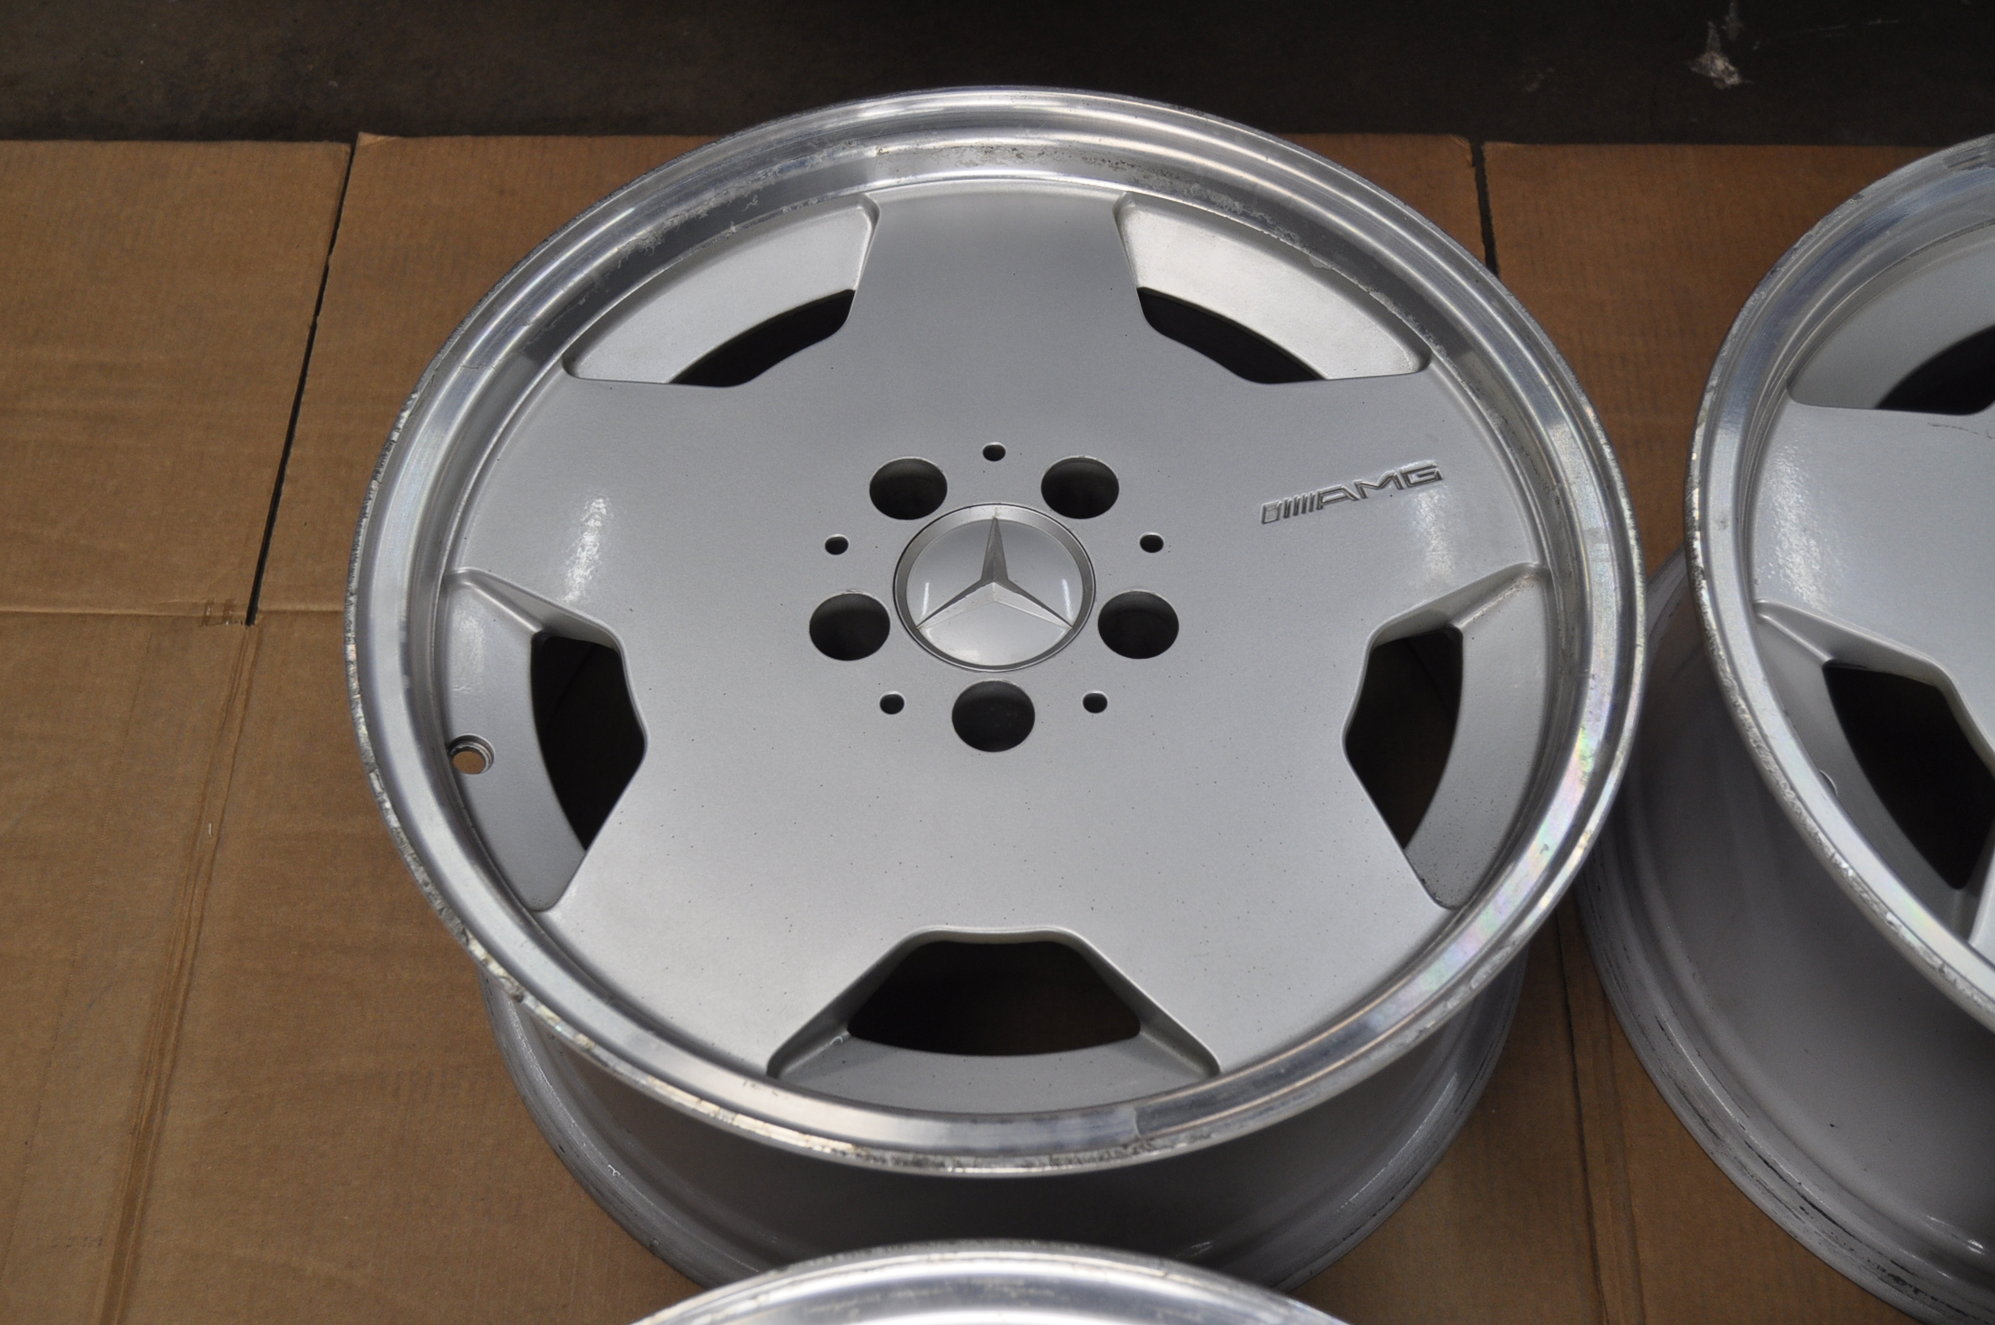 Wheels and Tires/Axles - AMG Aero 1 Monoblock 17x8 (post merger) - Used - All Years Mercedes-Benz All Models - Plano, TX 75093, United States